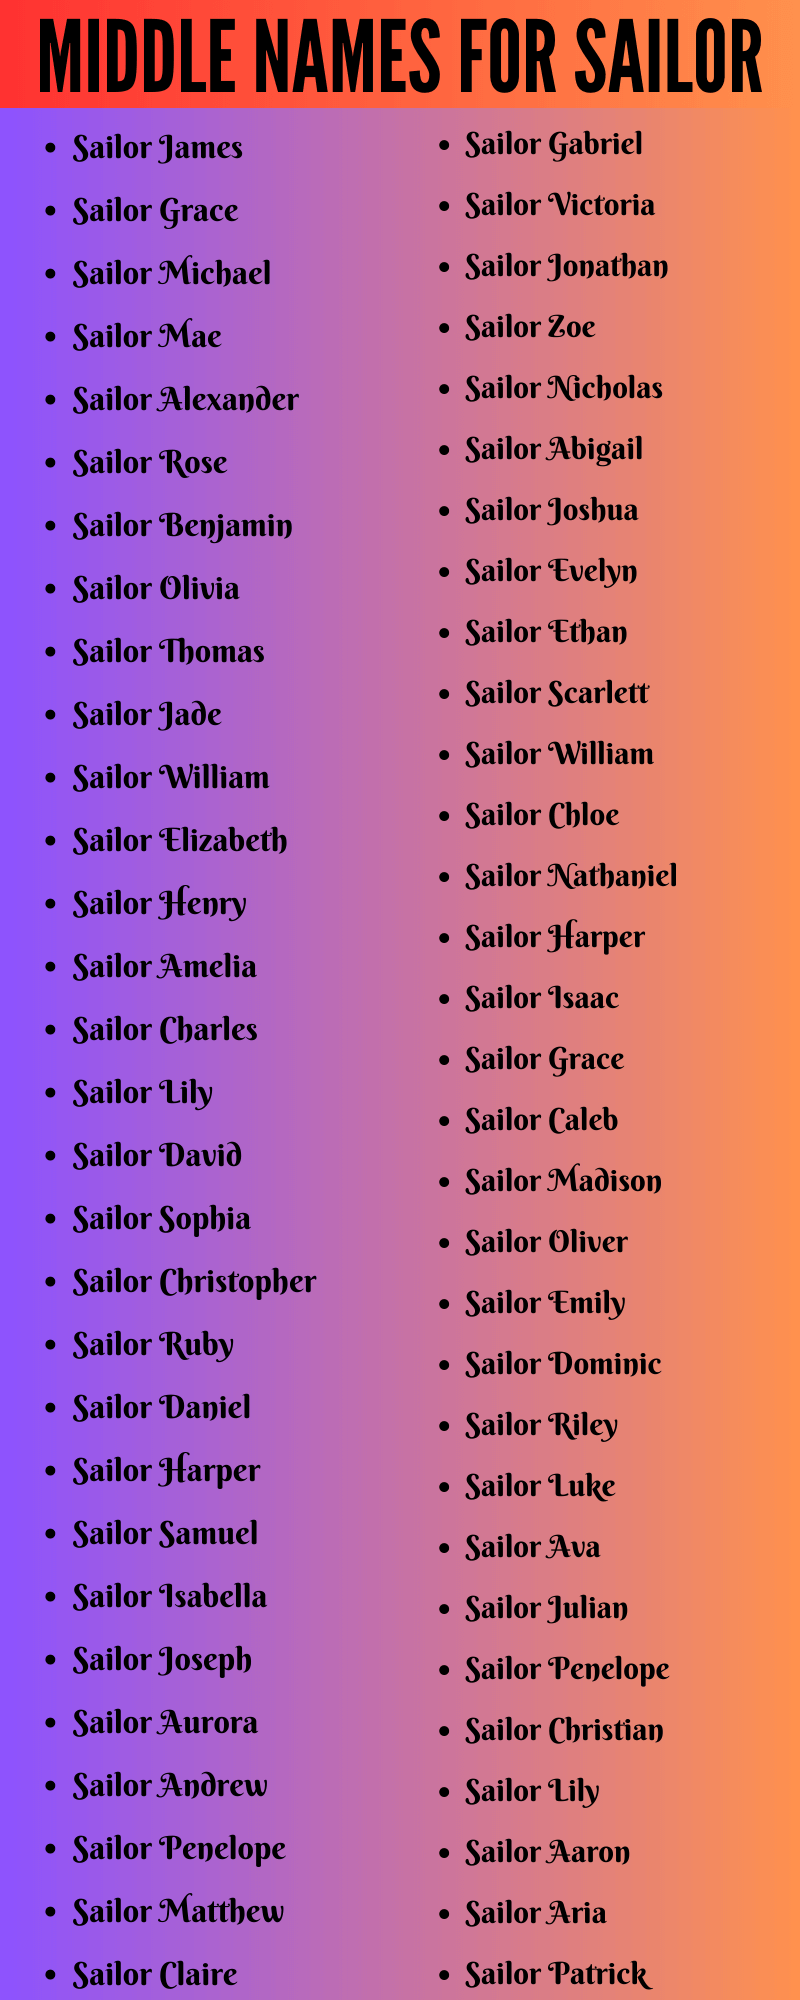 400 Creative Middle Names For Sailor